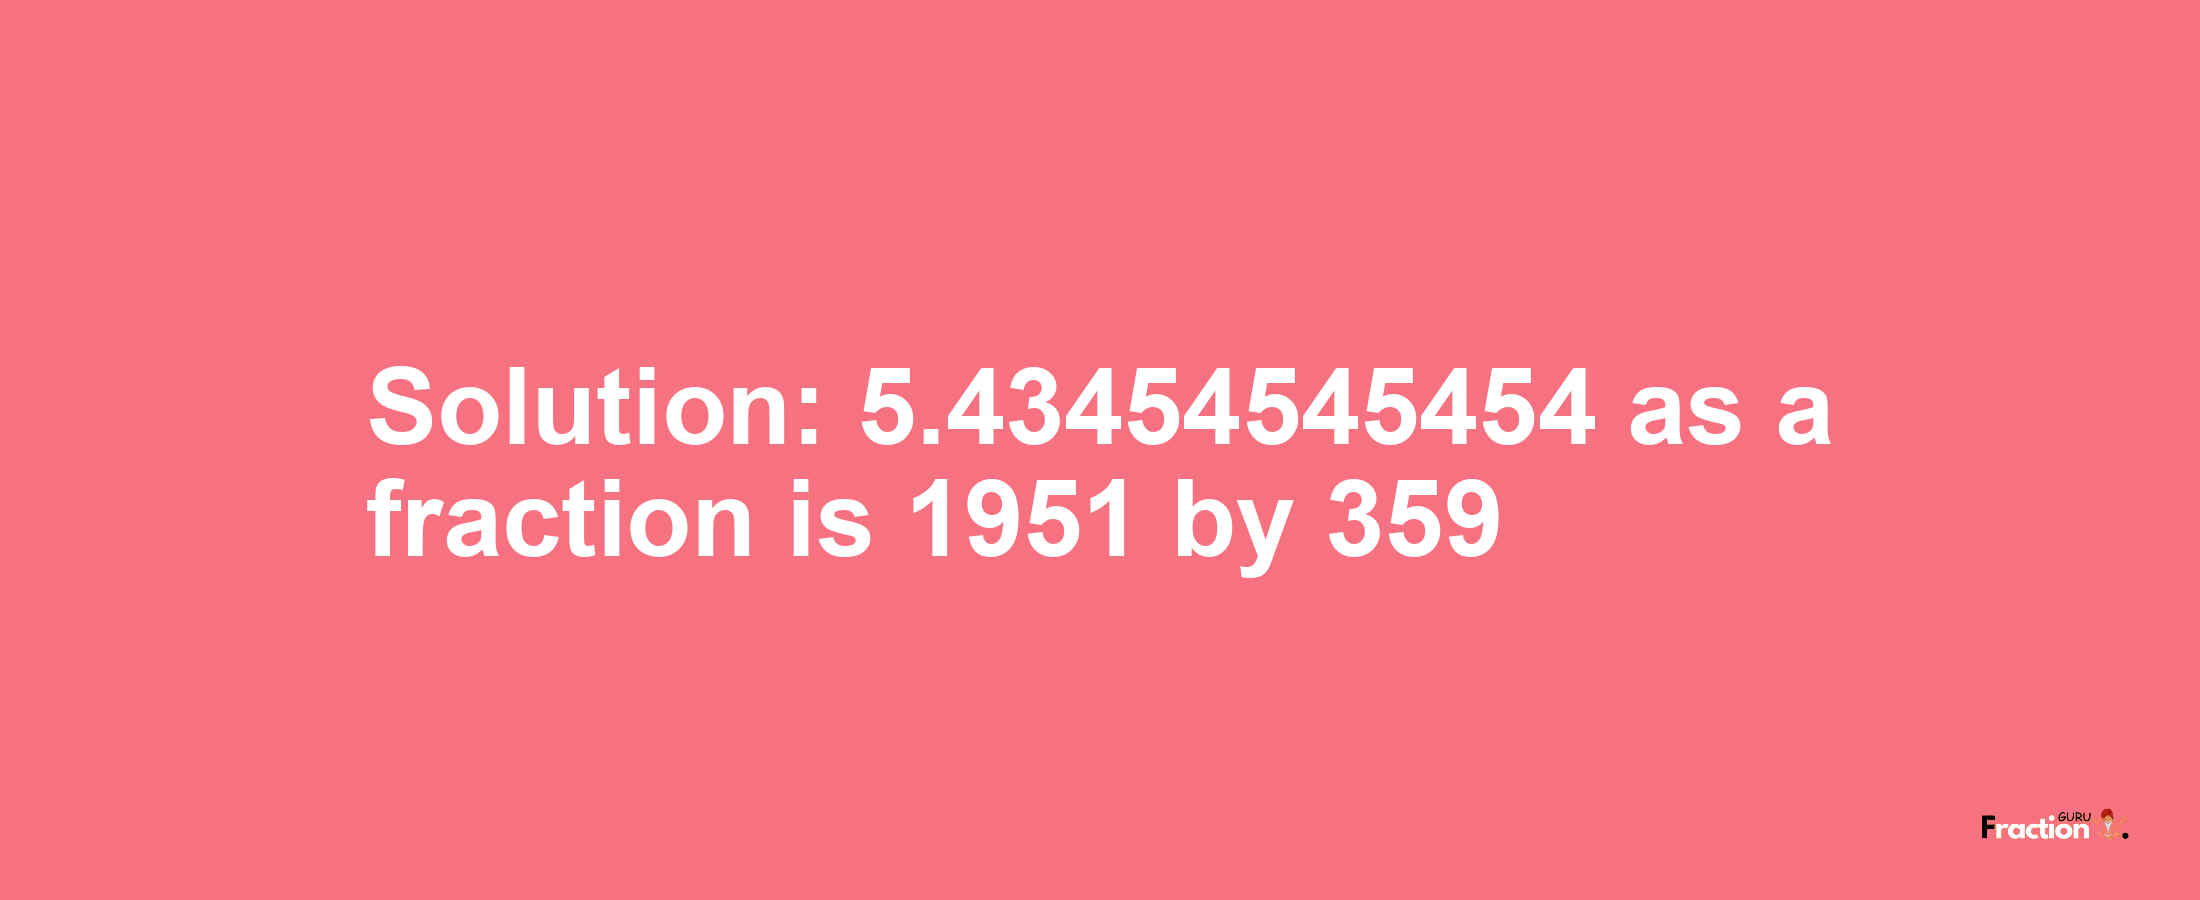 Solution:5.43454545454 as a fraction is 1951/359